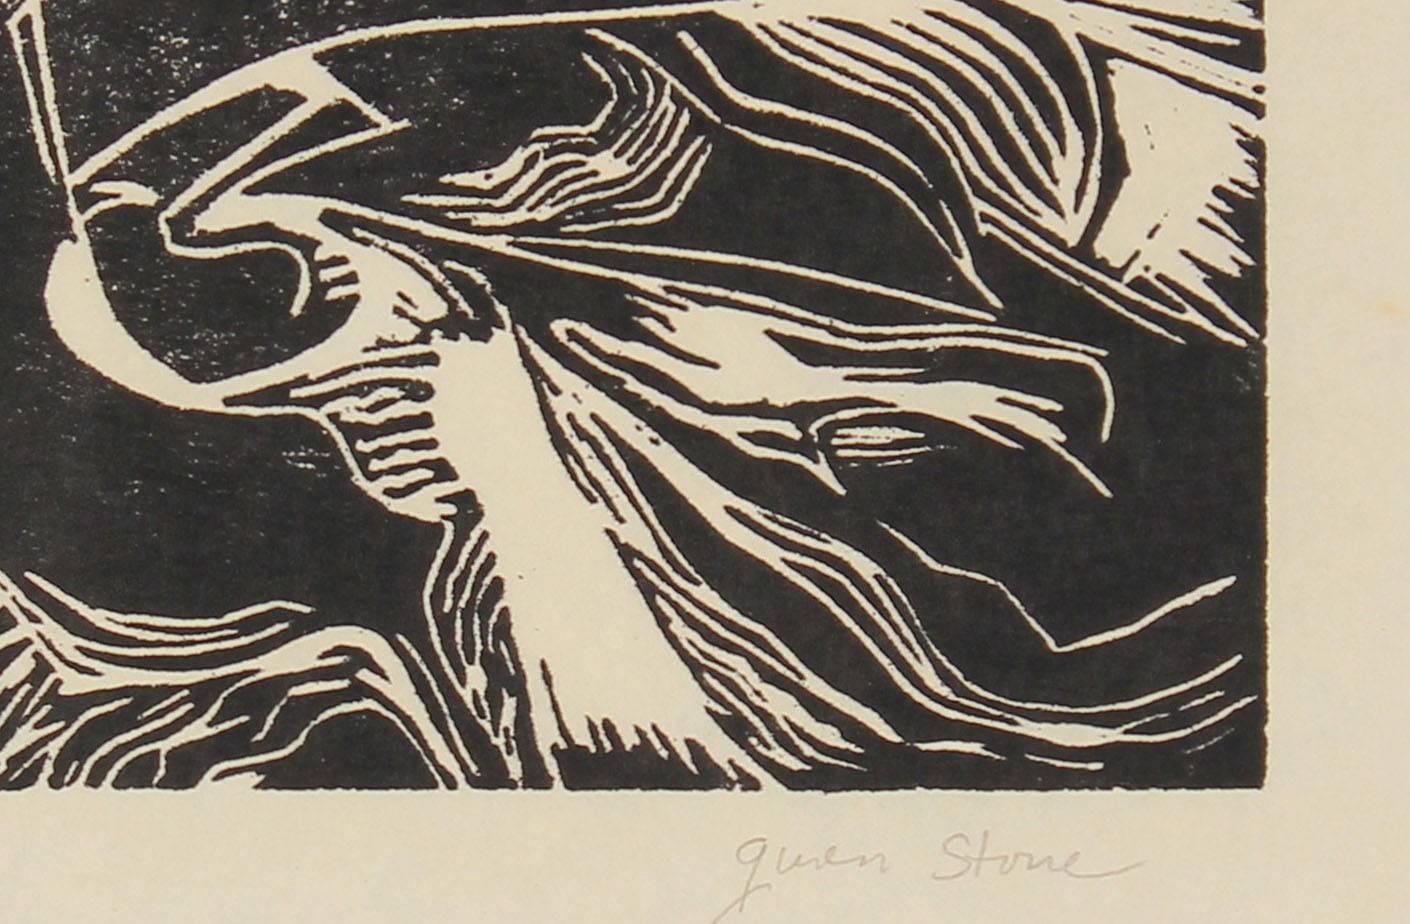 Monochromatic Linocut Abstract, Late 20th Century - Print by Gwen Stone